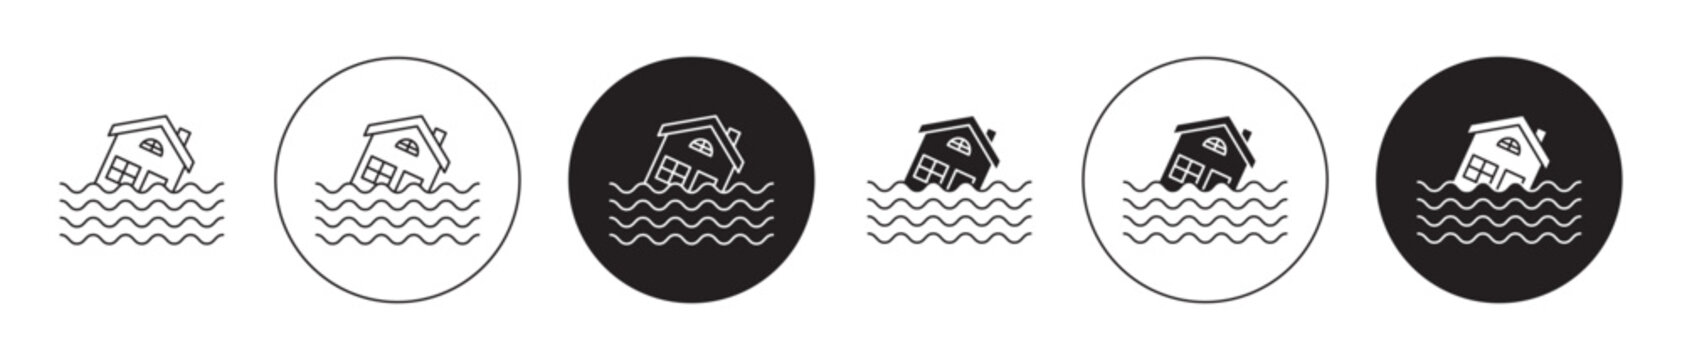 Flooded house icon set. river flood disaster vector symbol. hurricane home sign in black filled and outlined style.